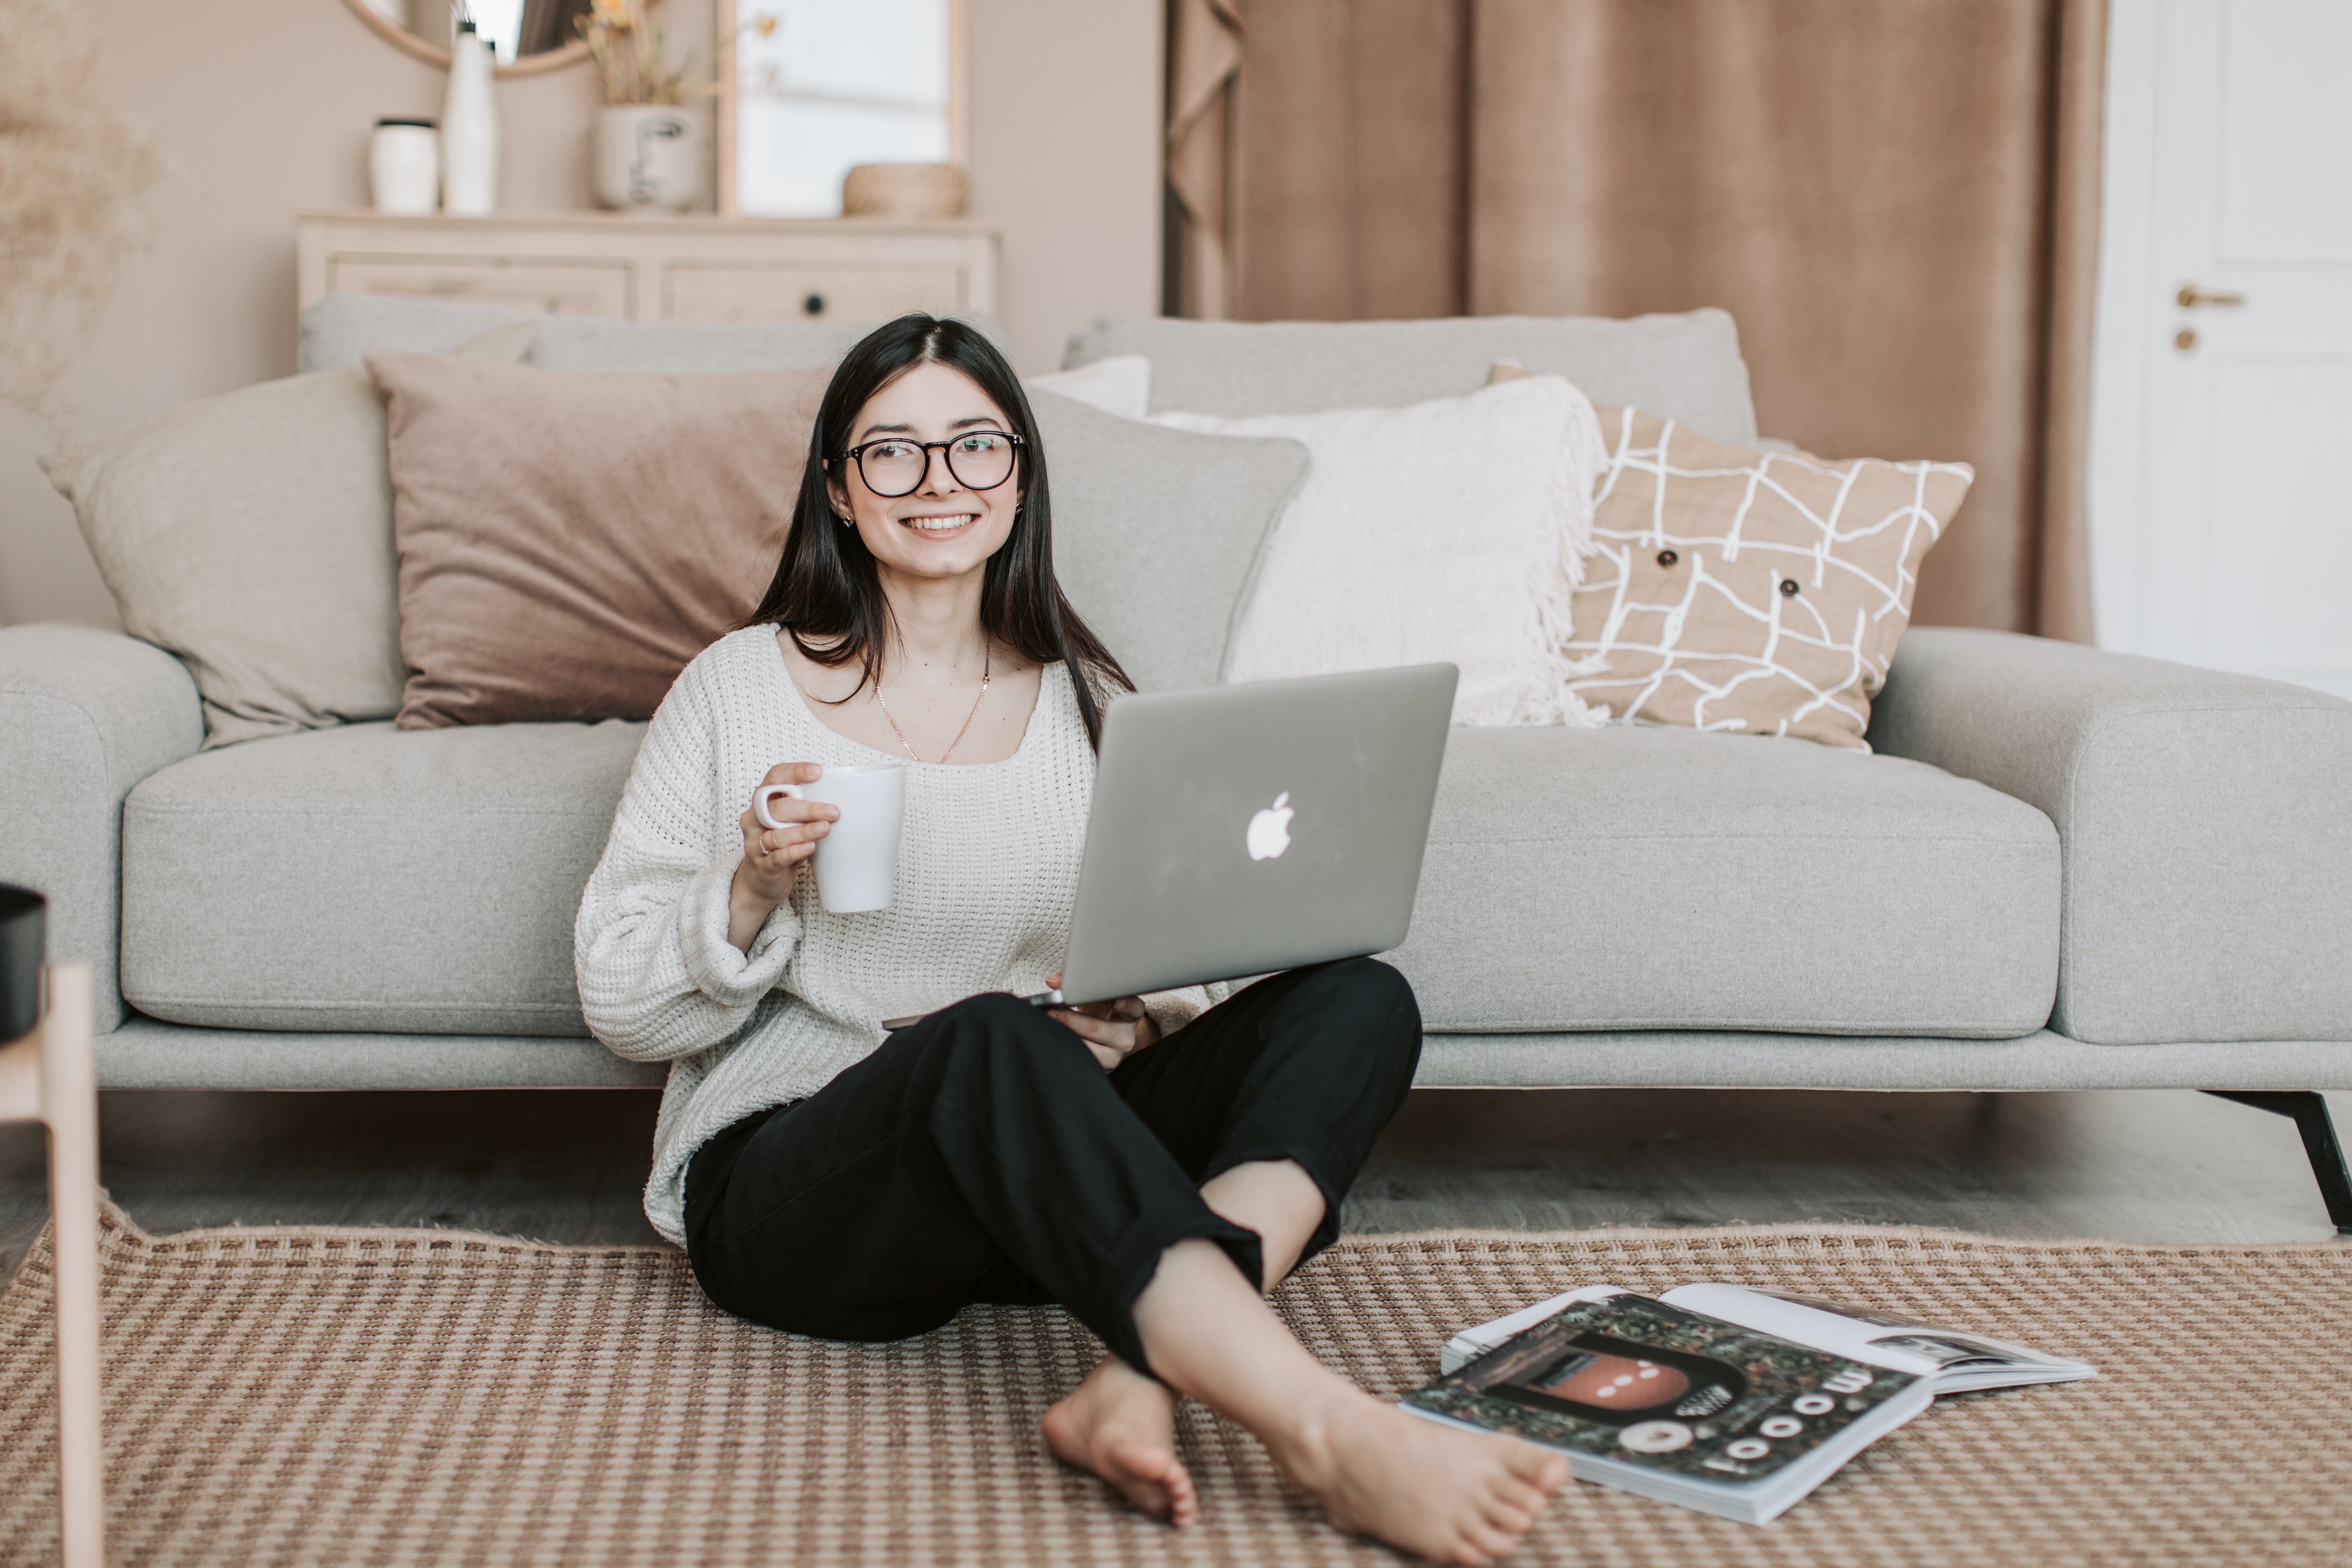 A woman using her laptop at home. | Source: Pexels